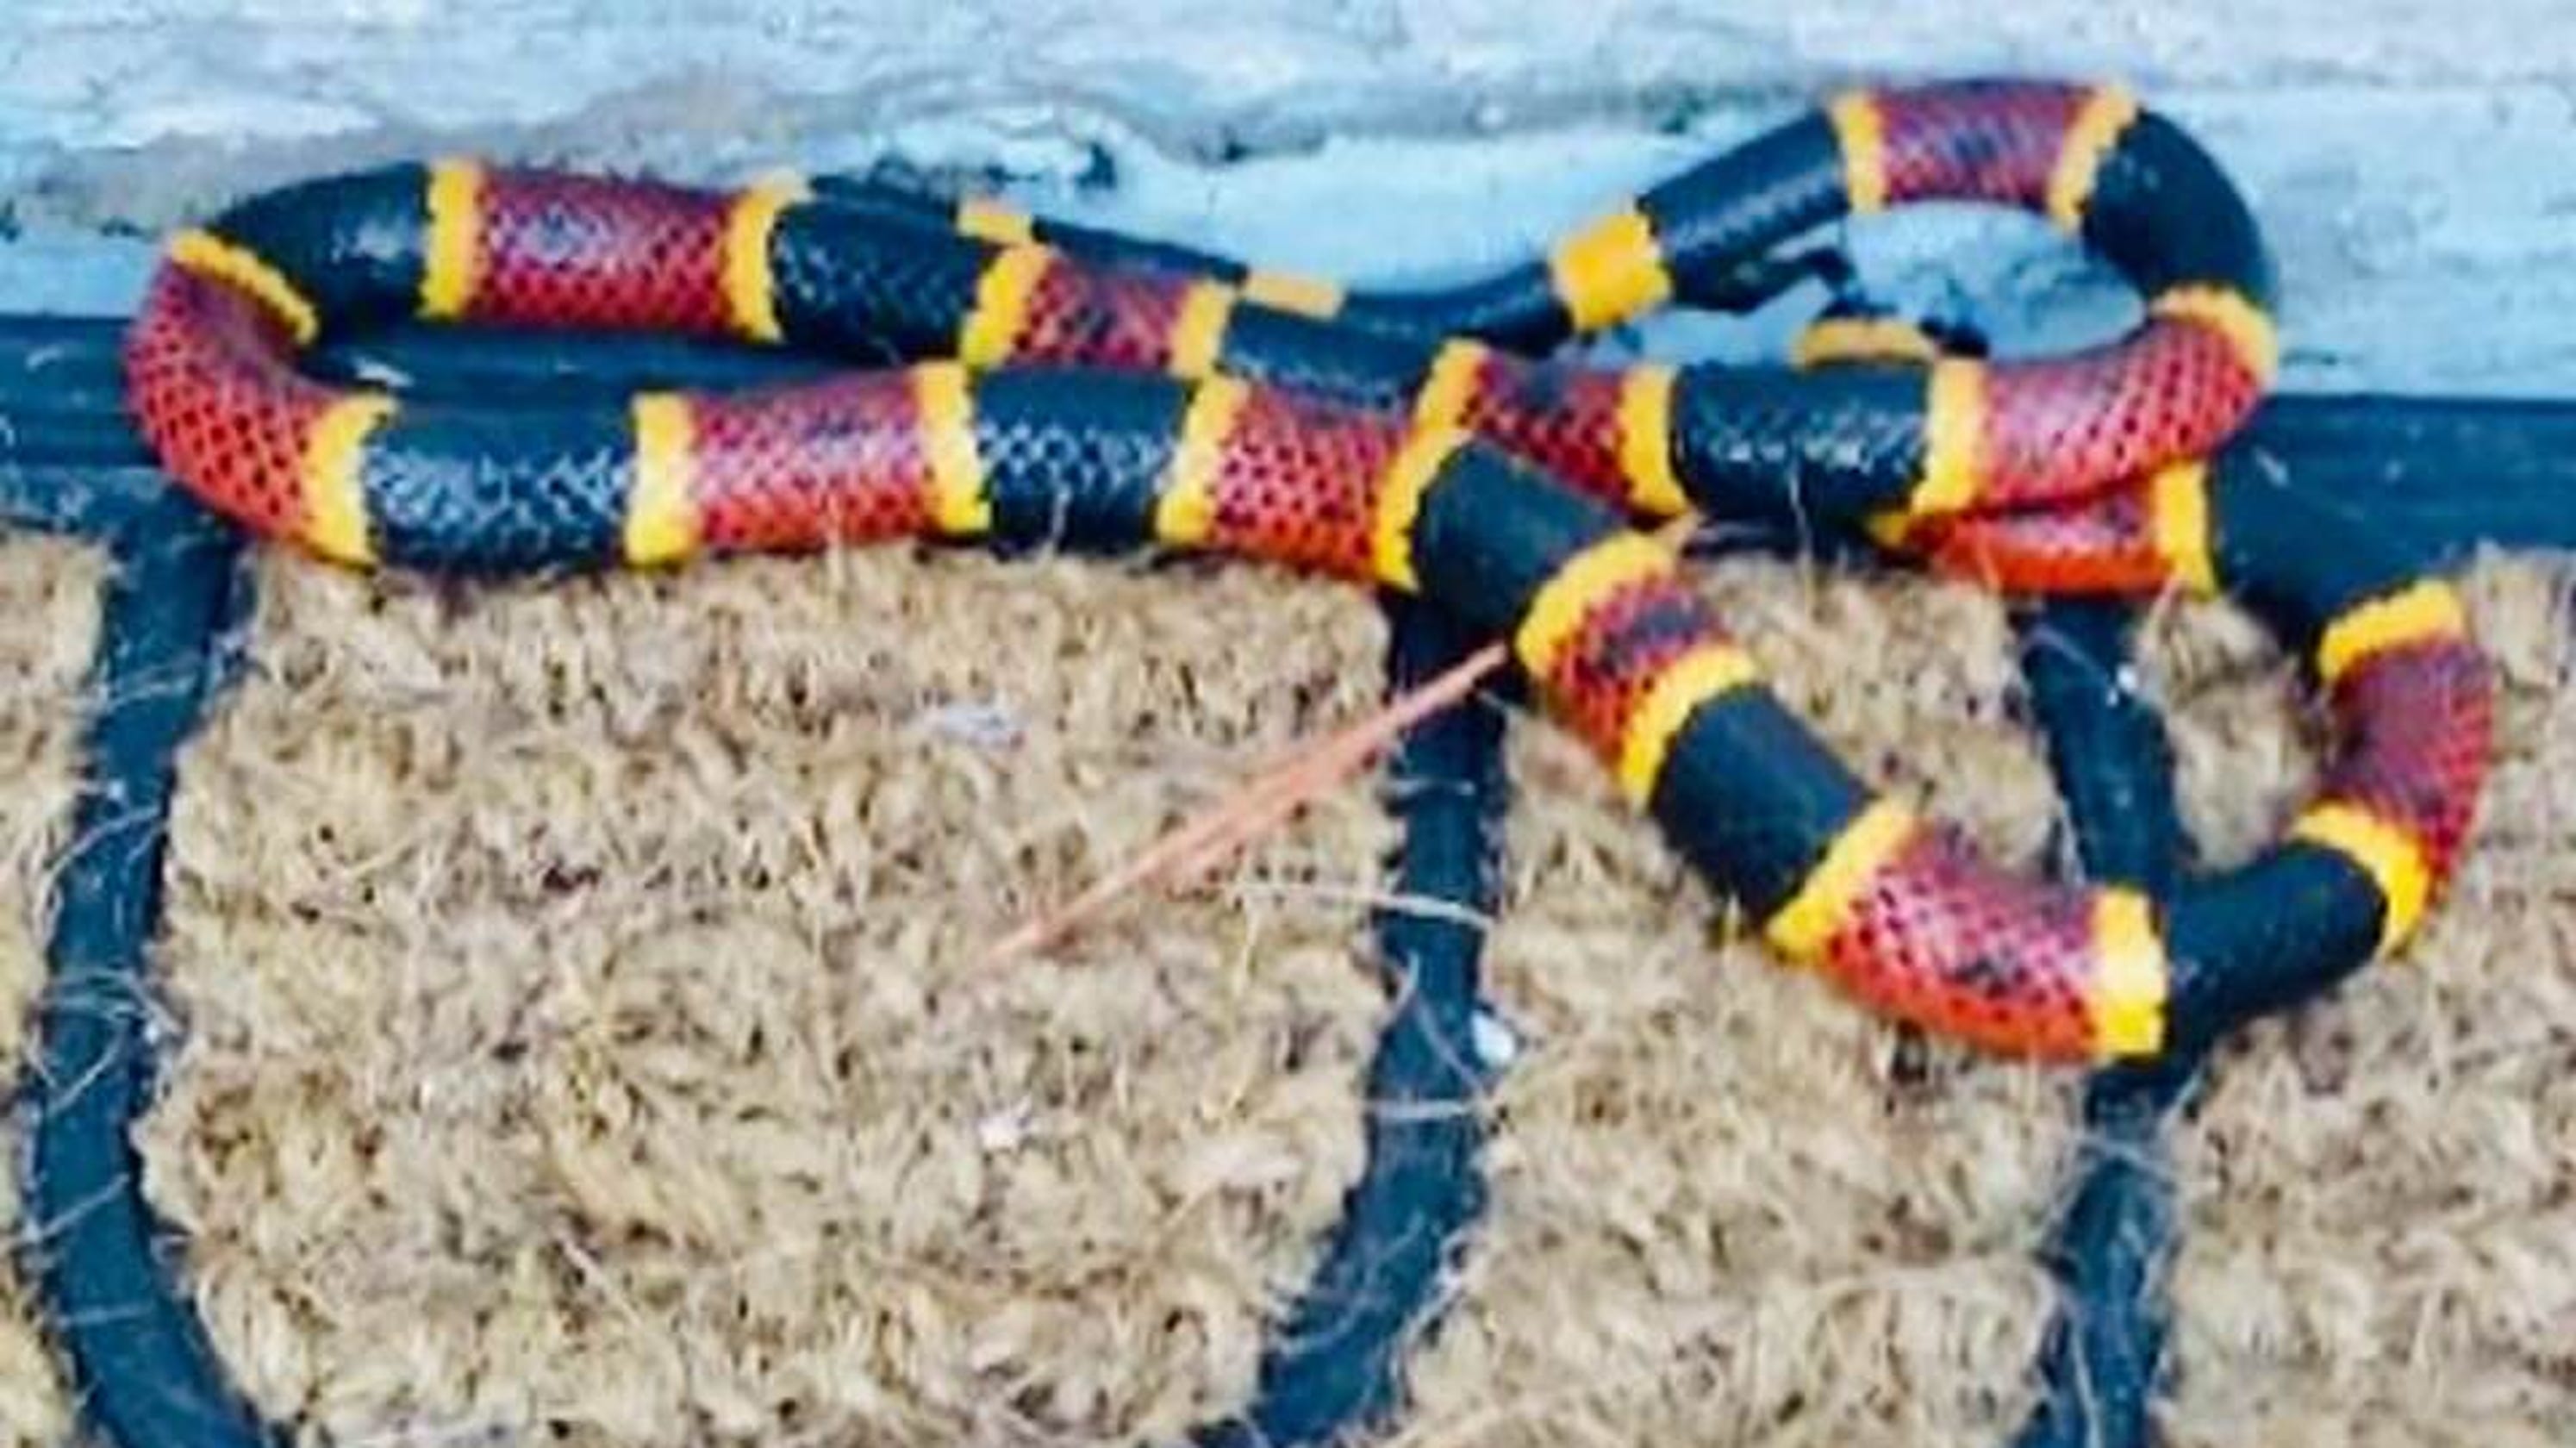 Florida woman uses machete to save venomous coral snake from cat